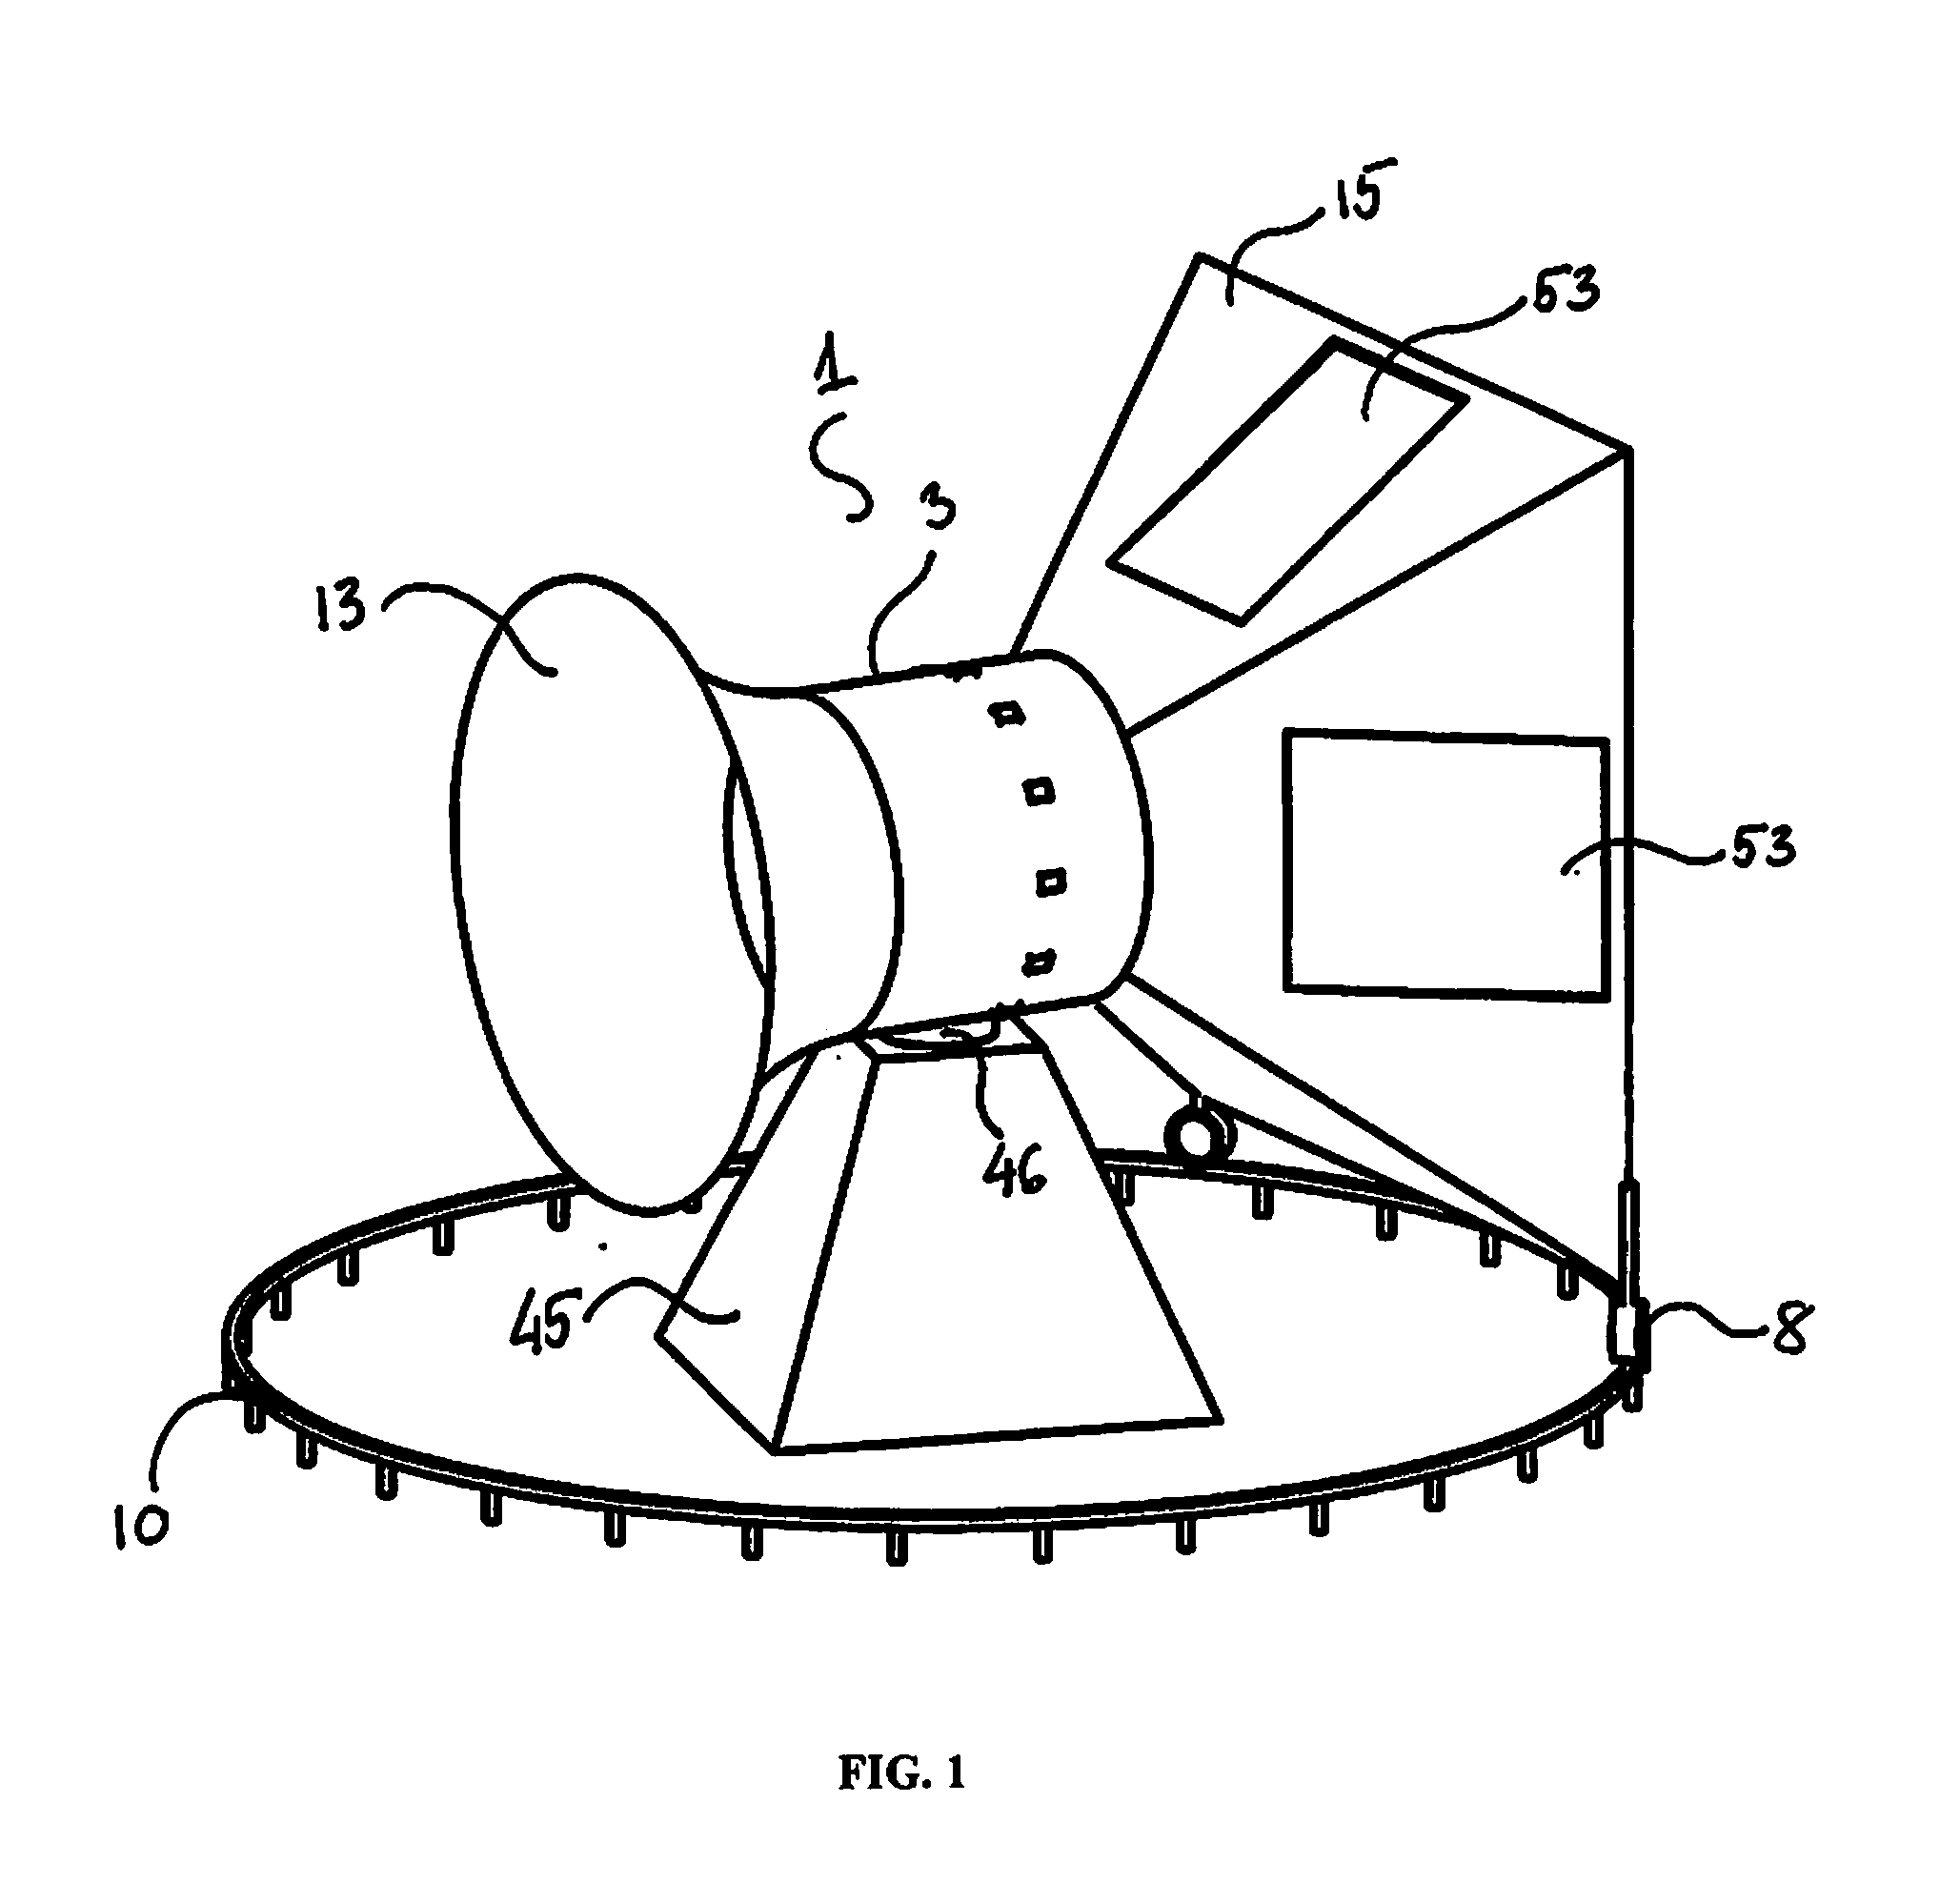 Synchronous Induced Wind Power Generation System